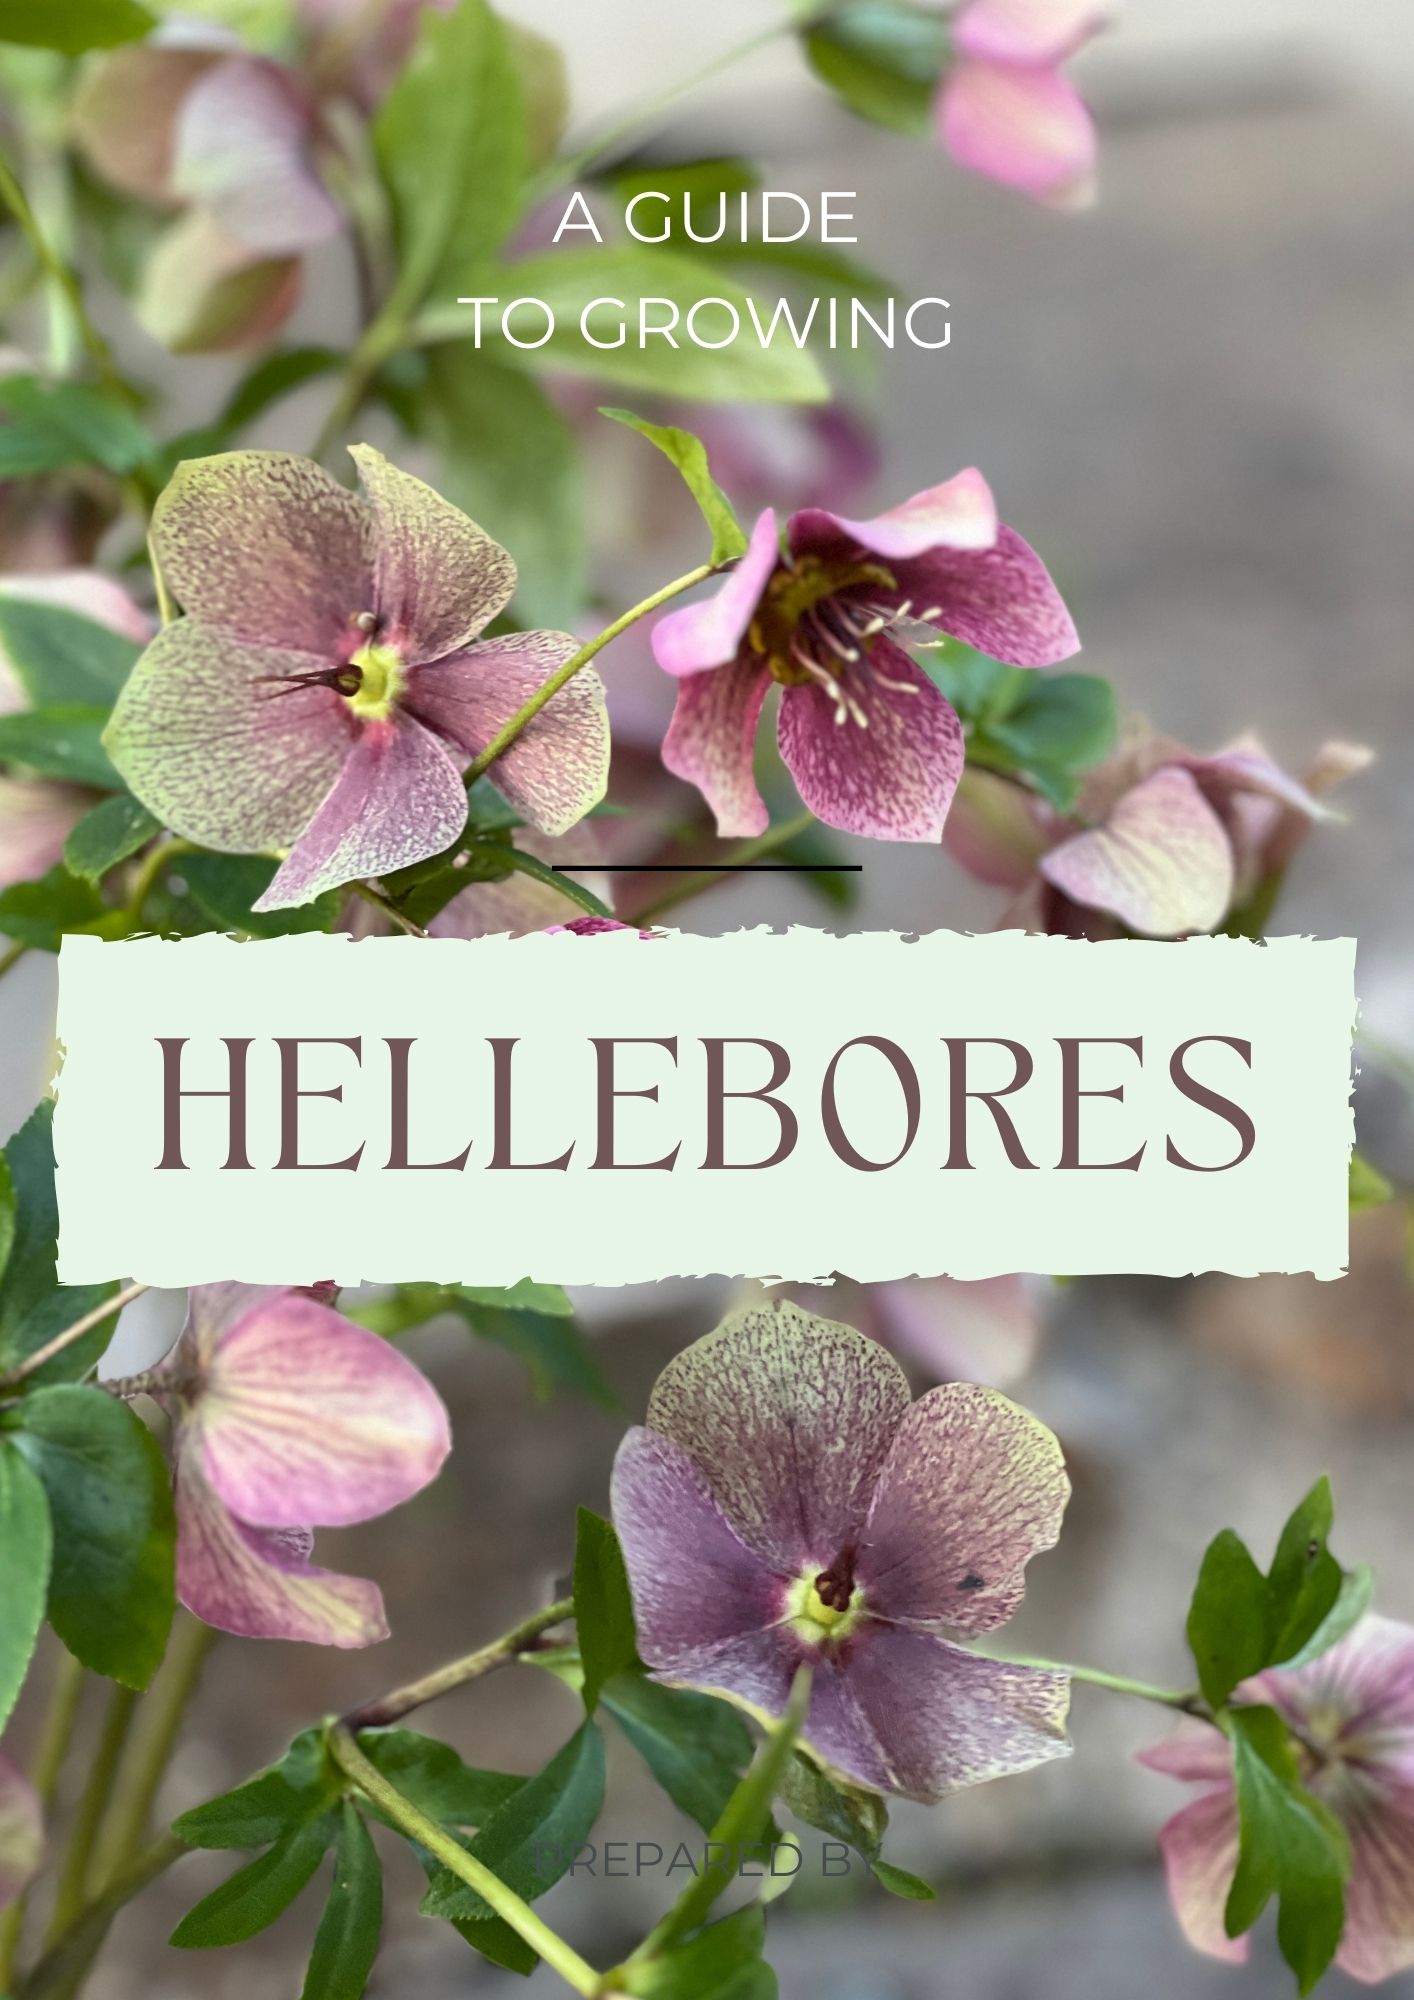 A guide to growing hellebores